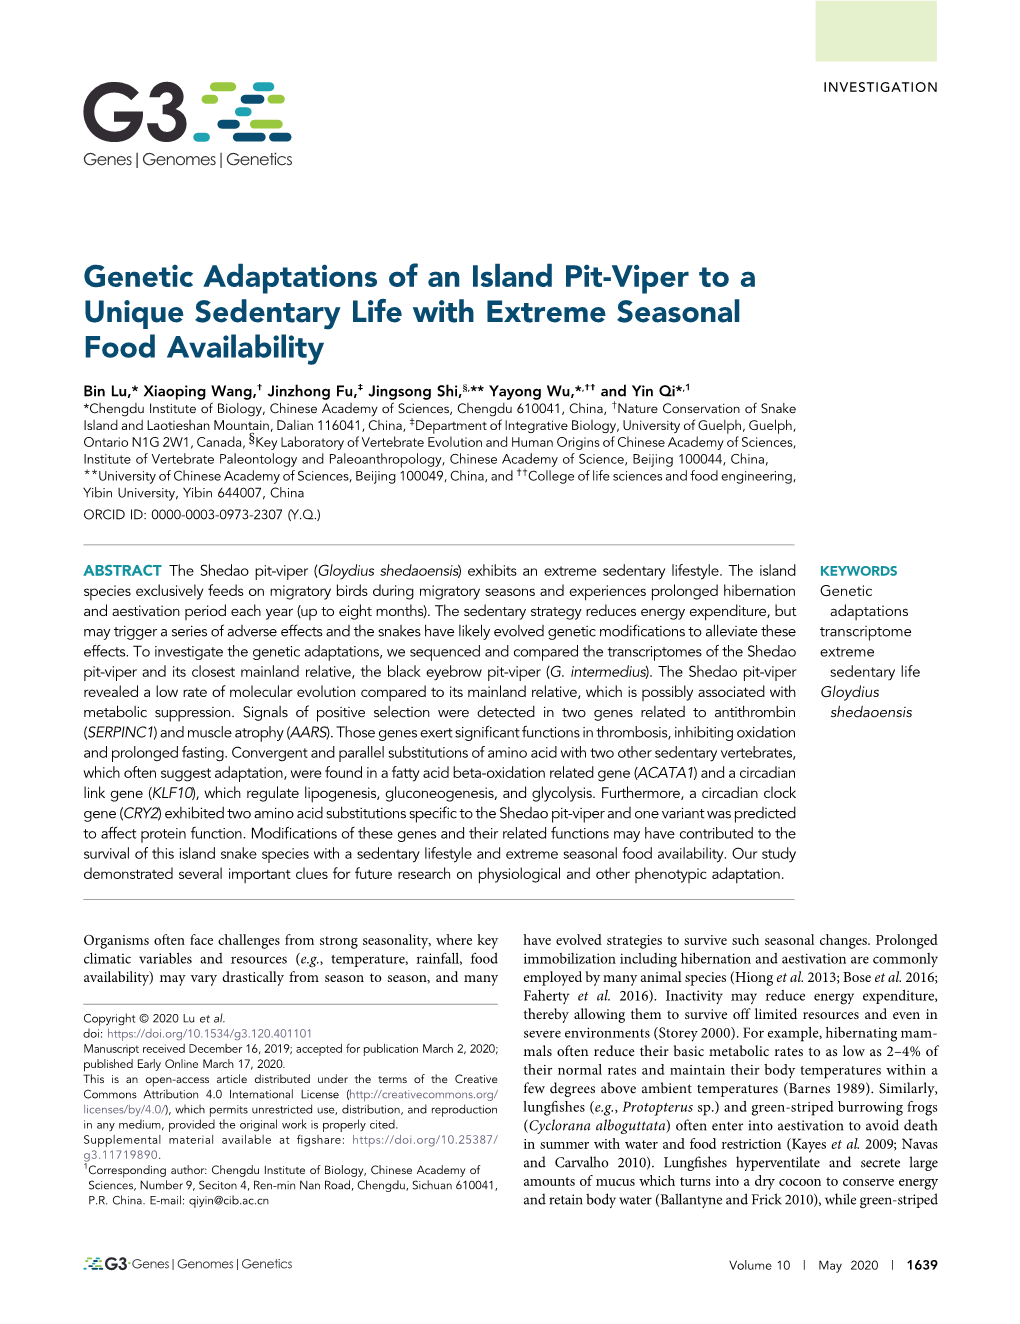 Genetic Adaptations of an Island Pit-Viper to a Unique Sedentary Life with Extreme Seasonal Food Availability